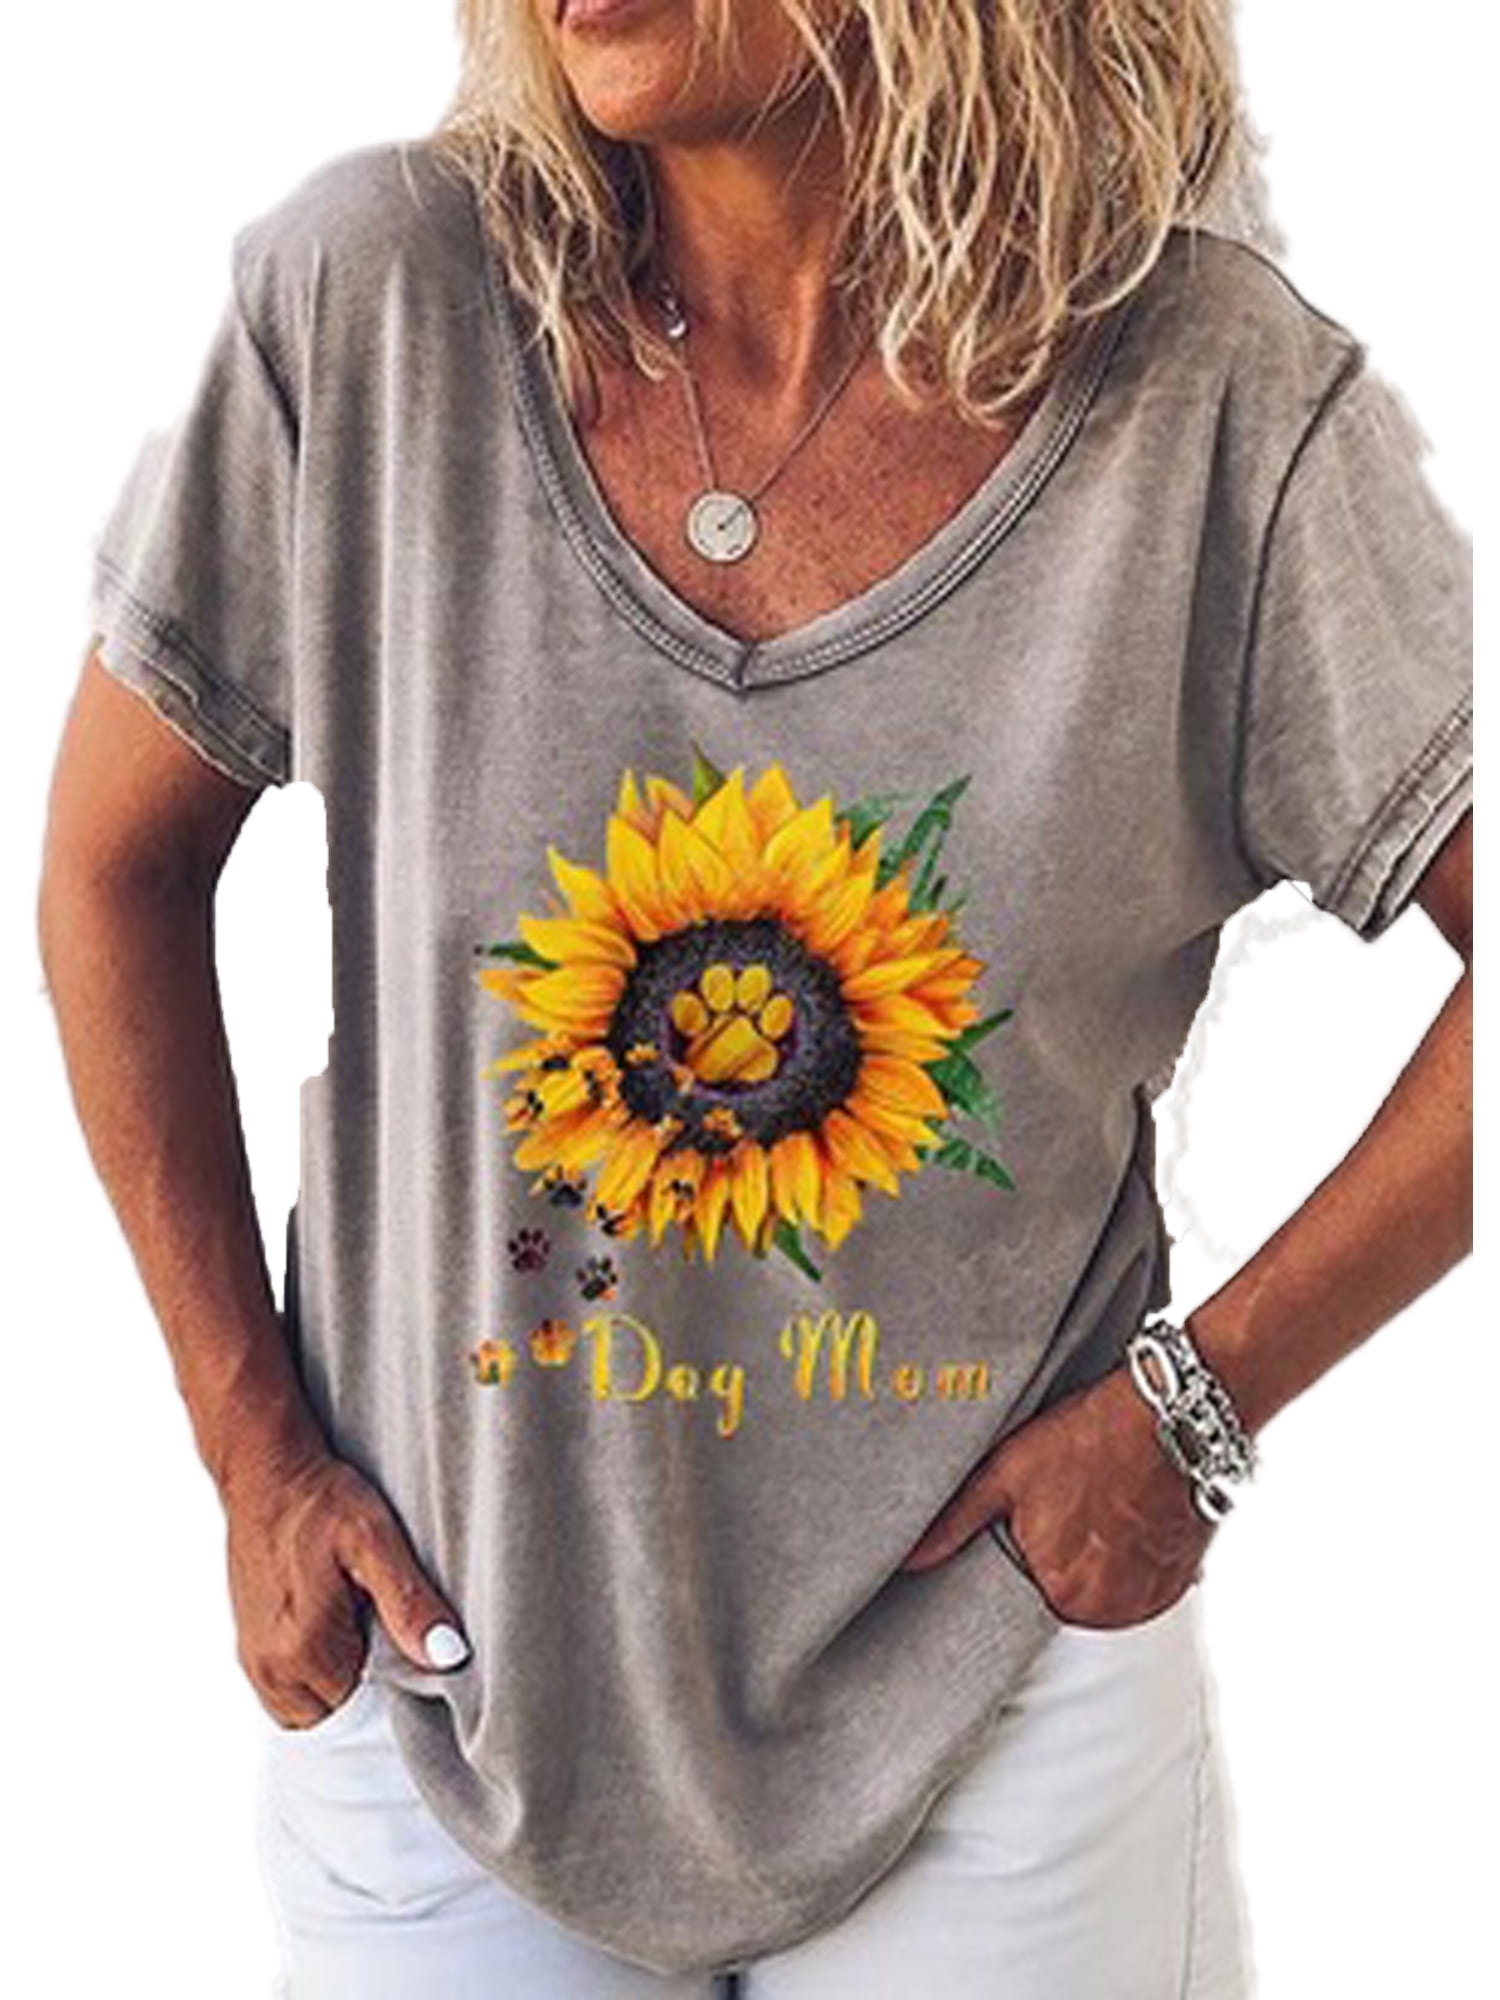 Women's Breathable Tshirt Summer Round Neck Short Sleeve Loose Fit Tee Top Trendy Sunflower Print Graphics Blouse 